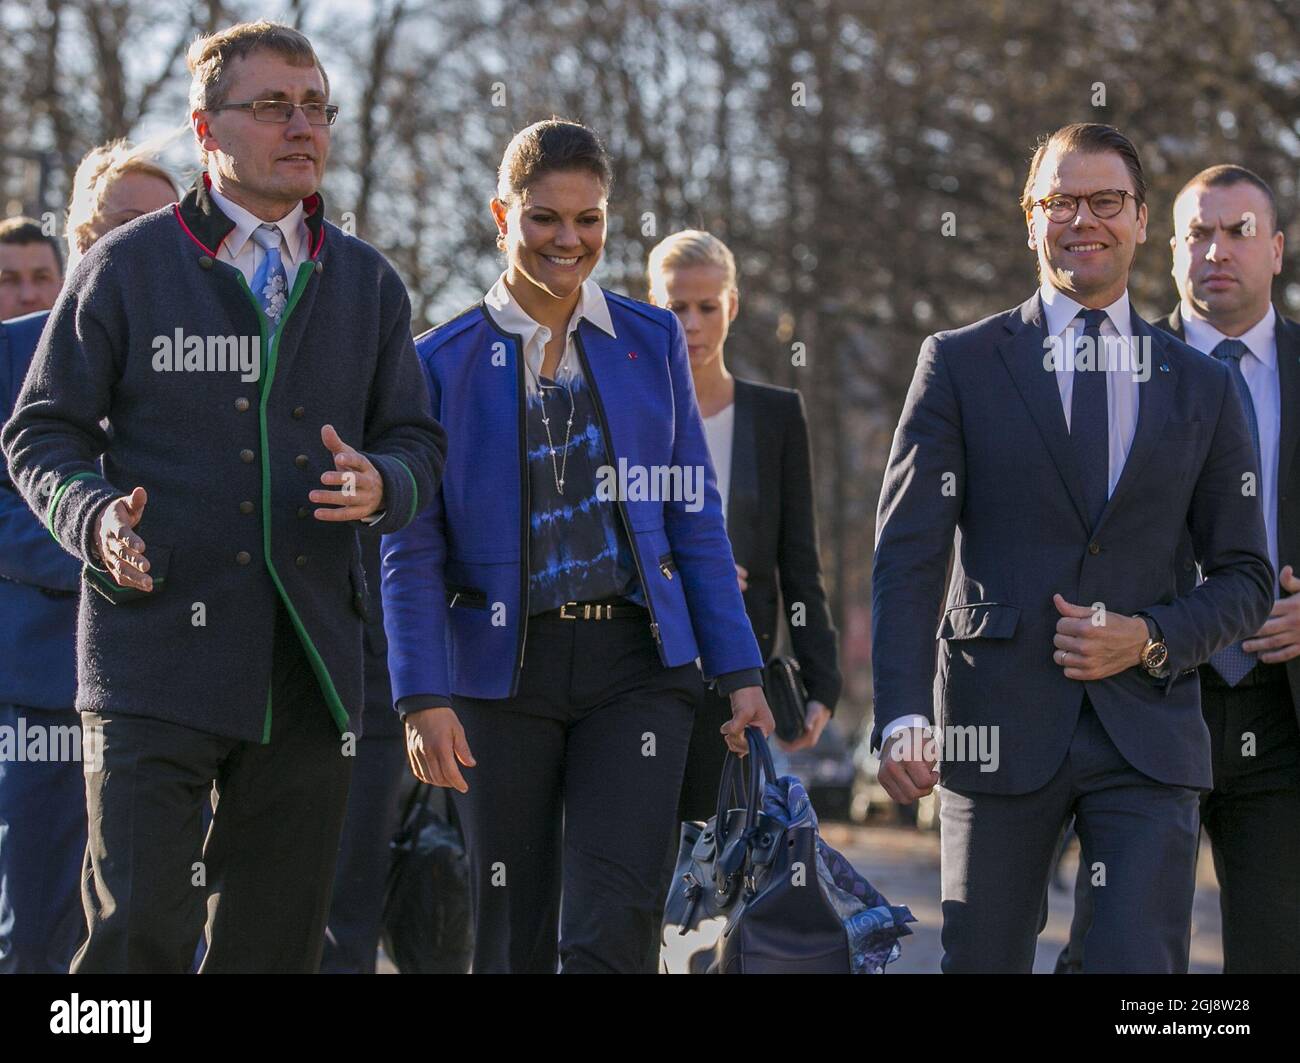 Tartu 2014-10-29 Crown Princess Victoria and Prince Daniel arrive at the Estonian National Museum in Tartu together with the museum's director TÂ›nis Lukas on the second day of the Crown Princess Couple's official visit to Estonia on October 29 201 Foto Karli Saul/ SCANPIX BALTICS / TT / kod 20985 ref:  Stock Photo